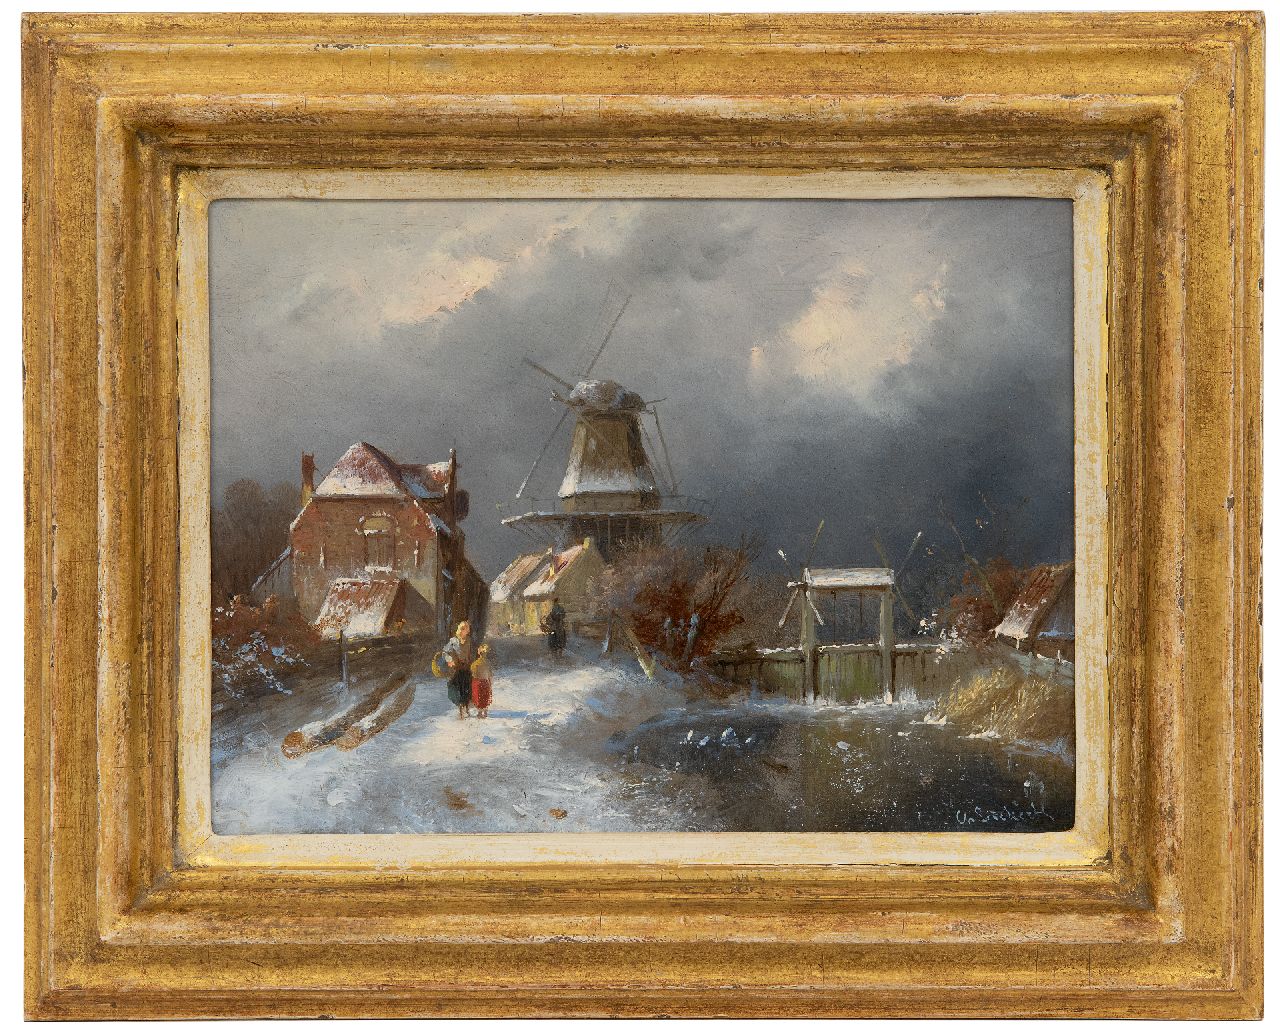 Leickert C.H.J.  | 'Charles' Henri Joseph Leickert, Winter landscape with figures at a lock, oil on panel 19.3 x 26.0 cm, signed l.r.